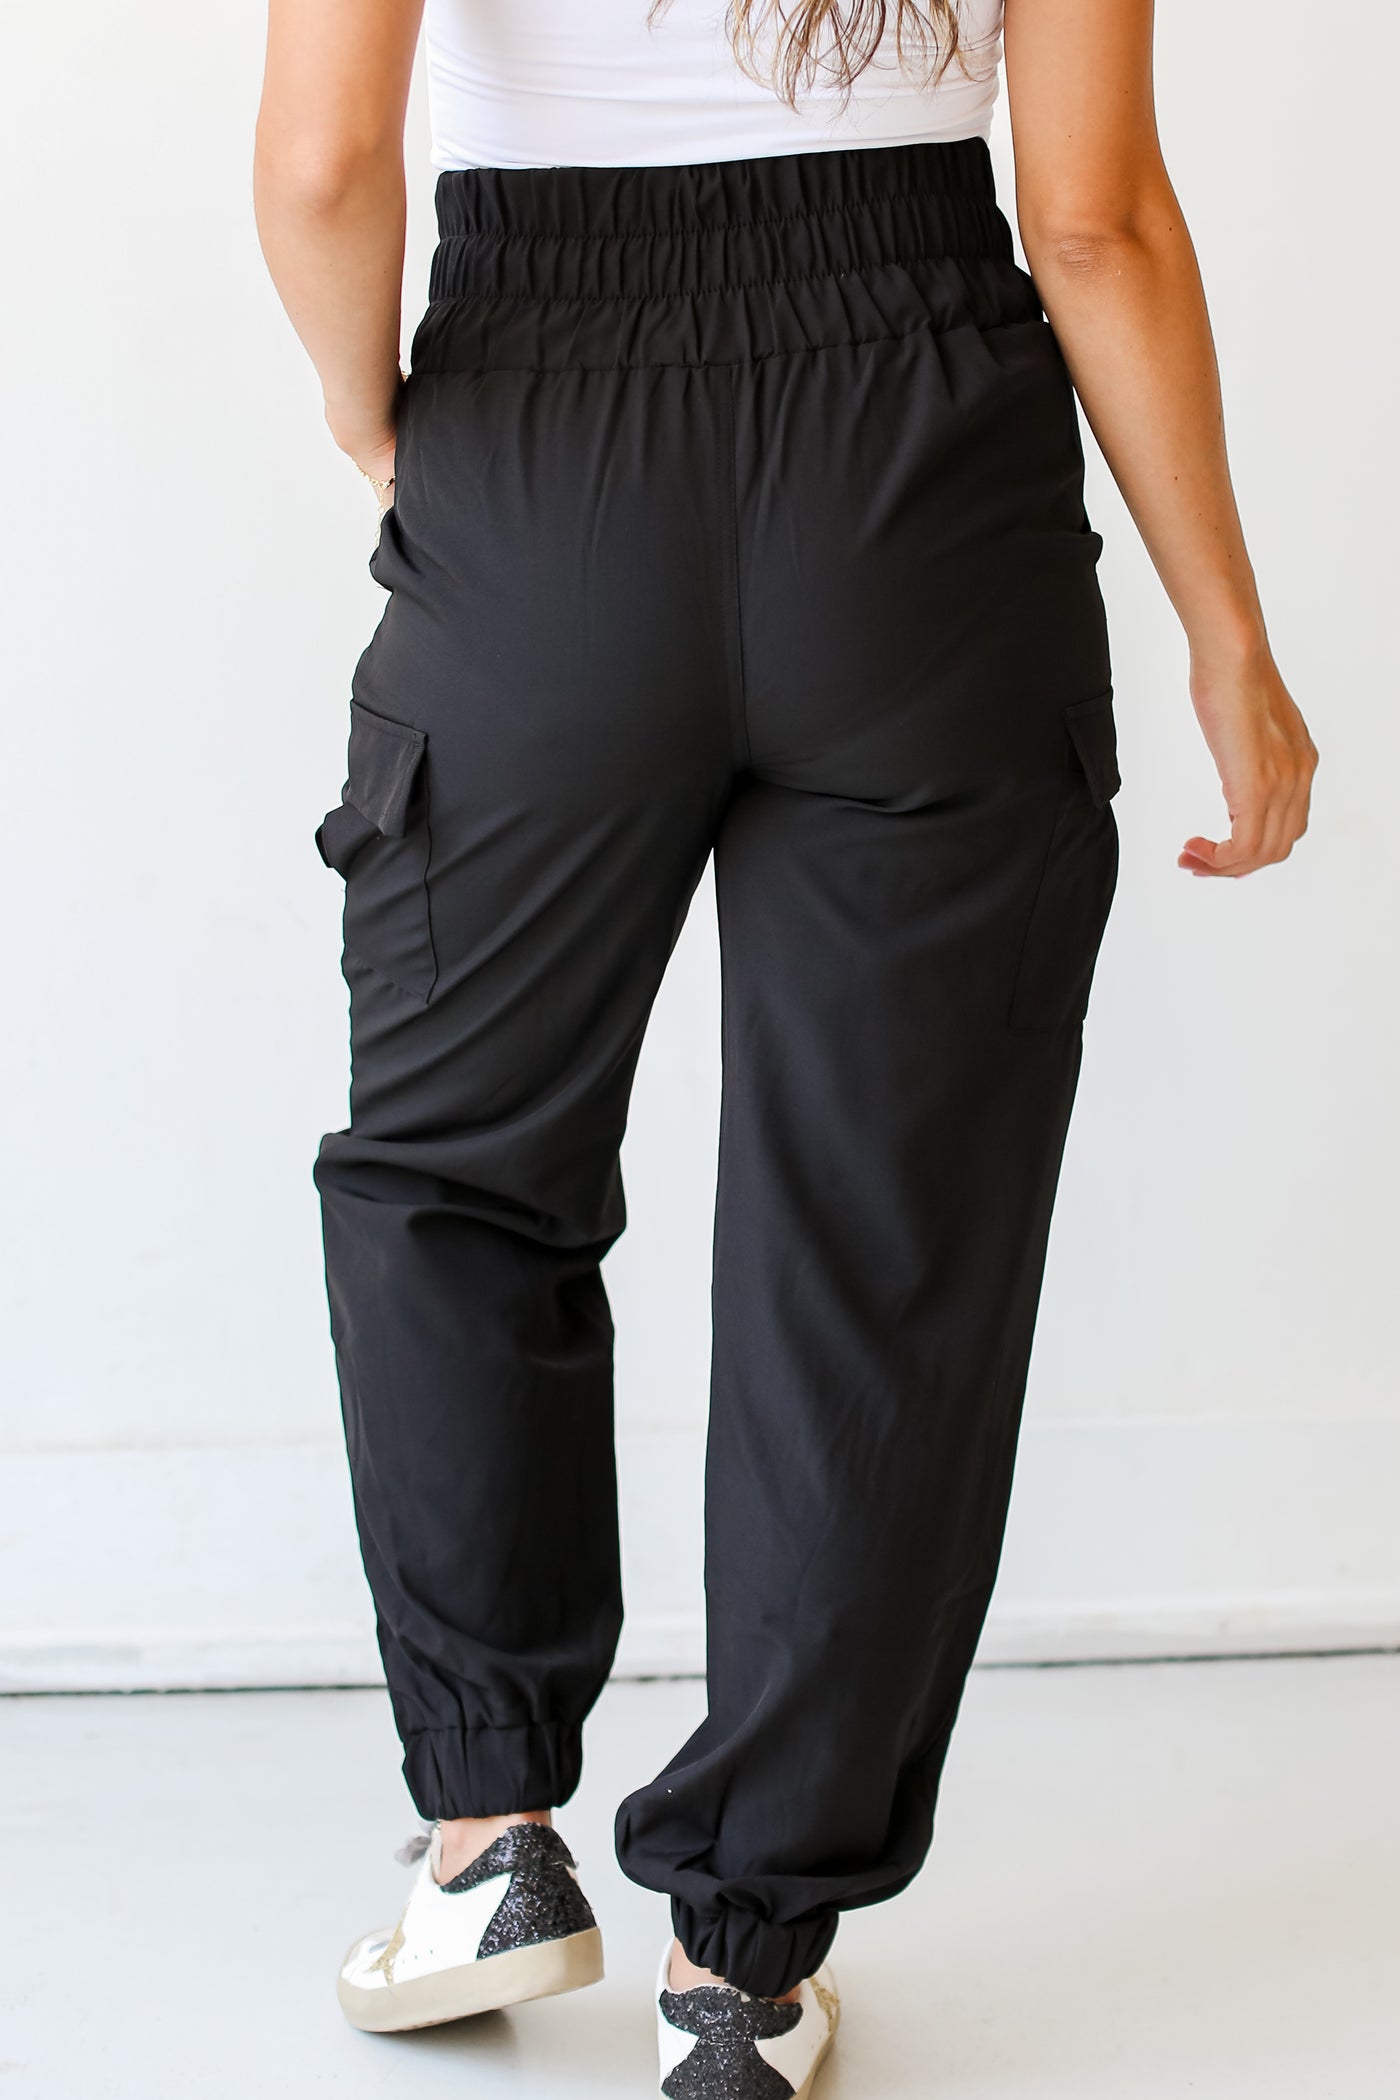 Shop joggers and cargo pants for women online